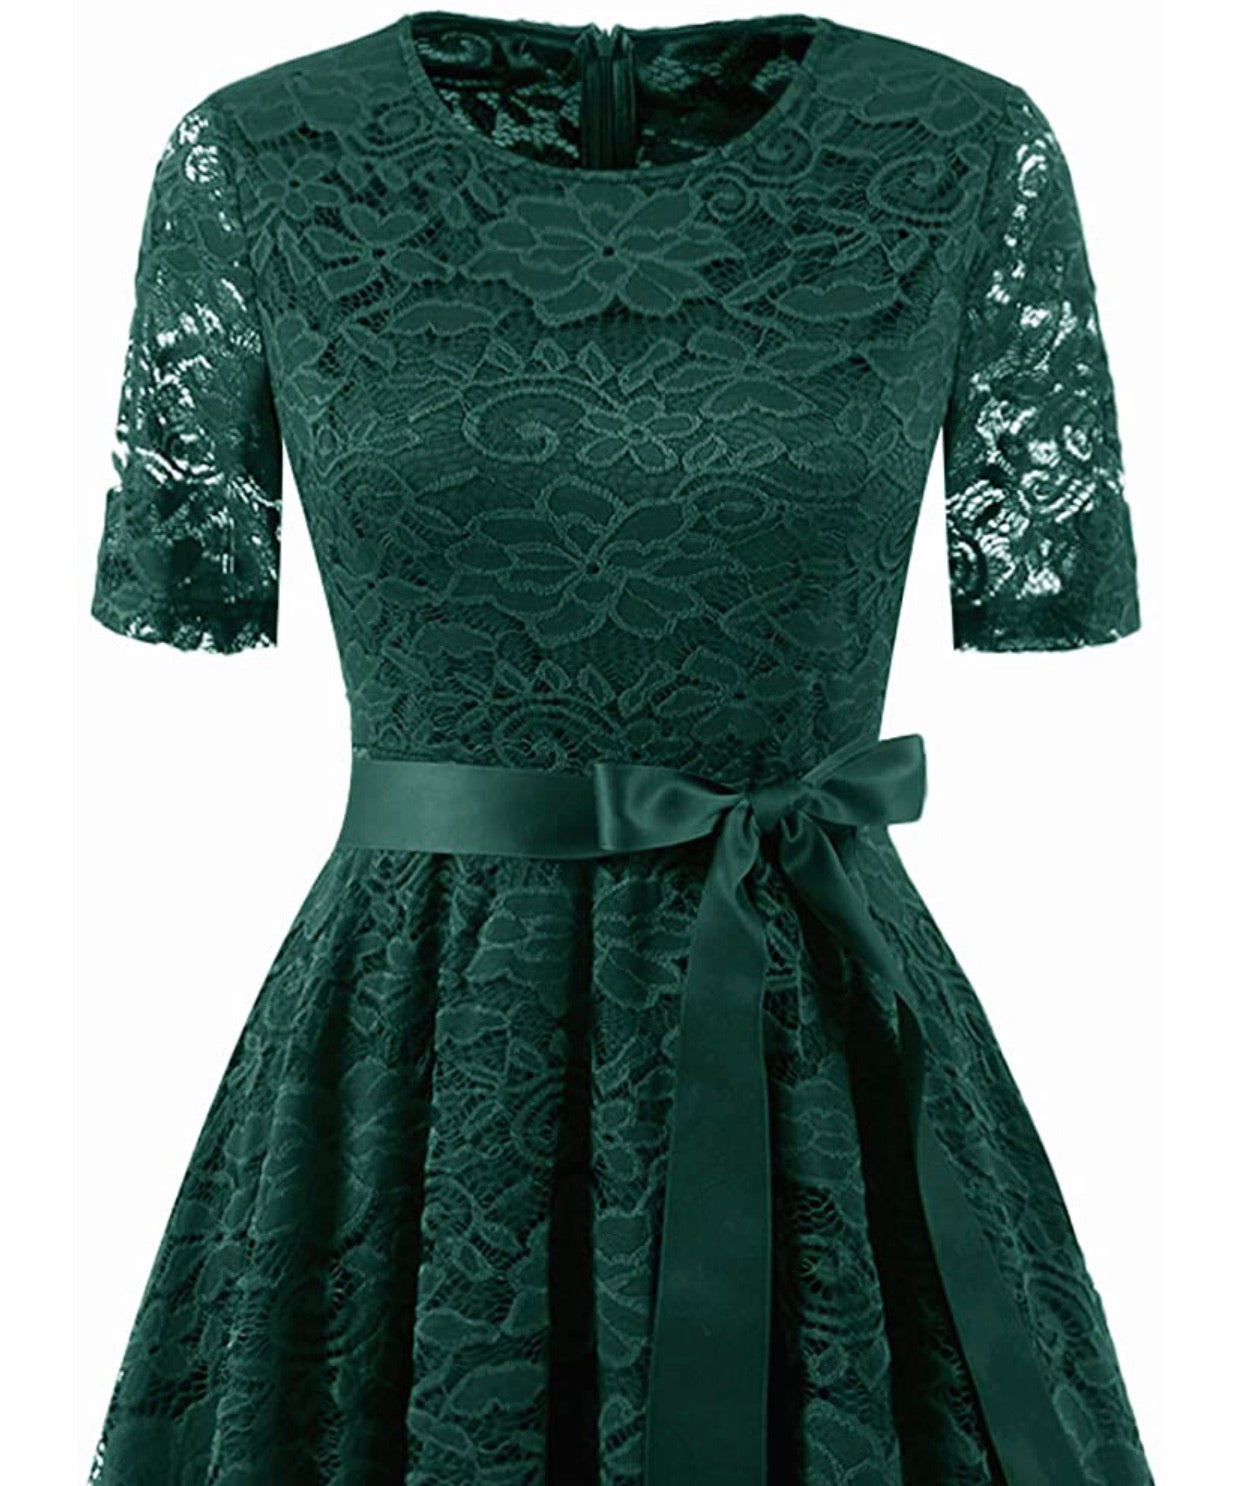 Vintage Inspired Full Lace Cocktail Dress, Sizes Small - 3XLarge (Green)